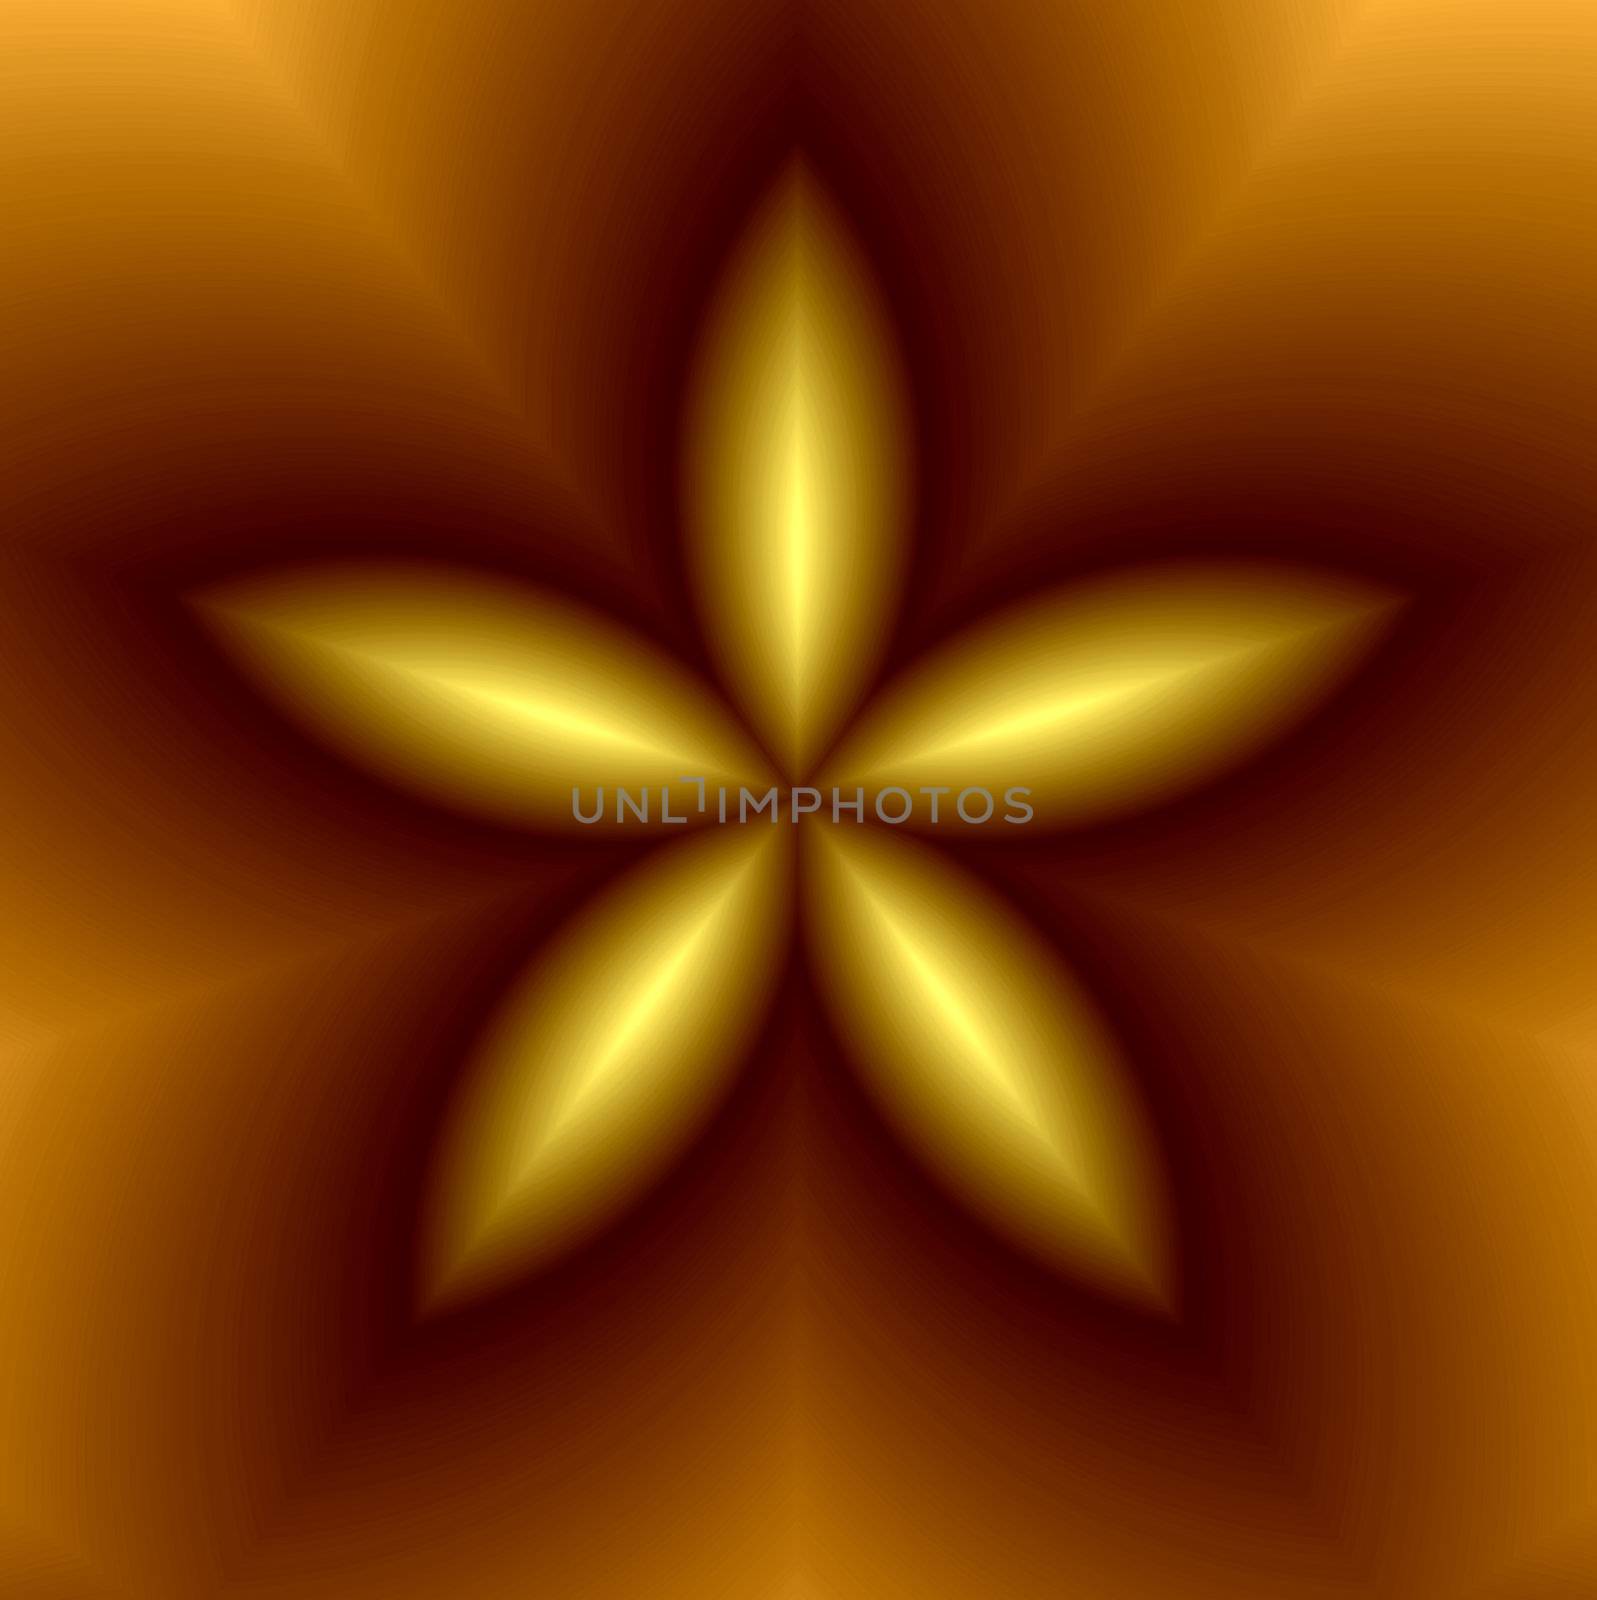 yellow and brown flower design illustration on a dark background